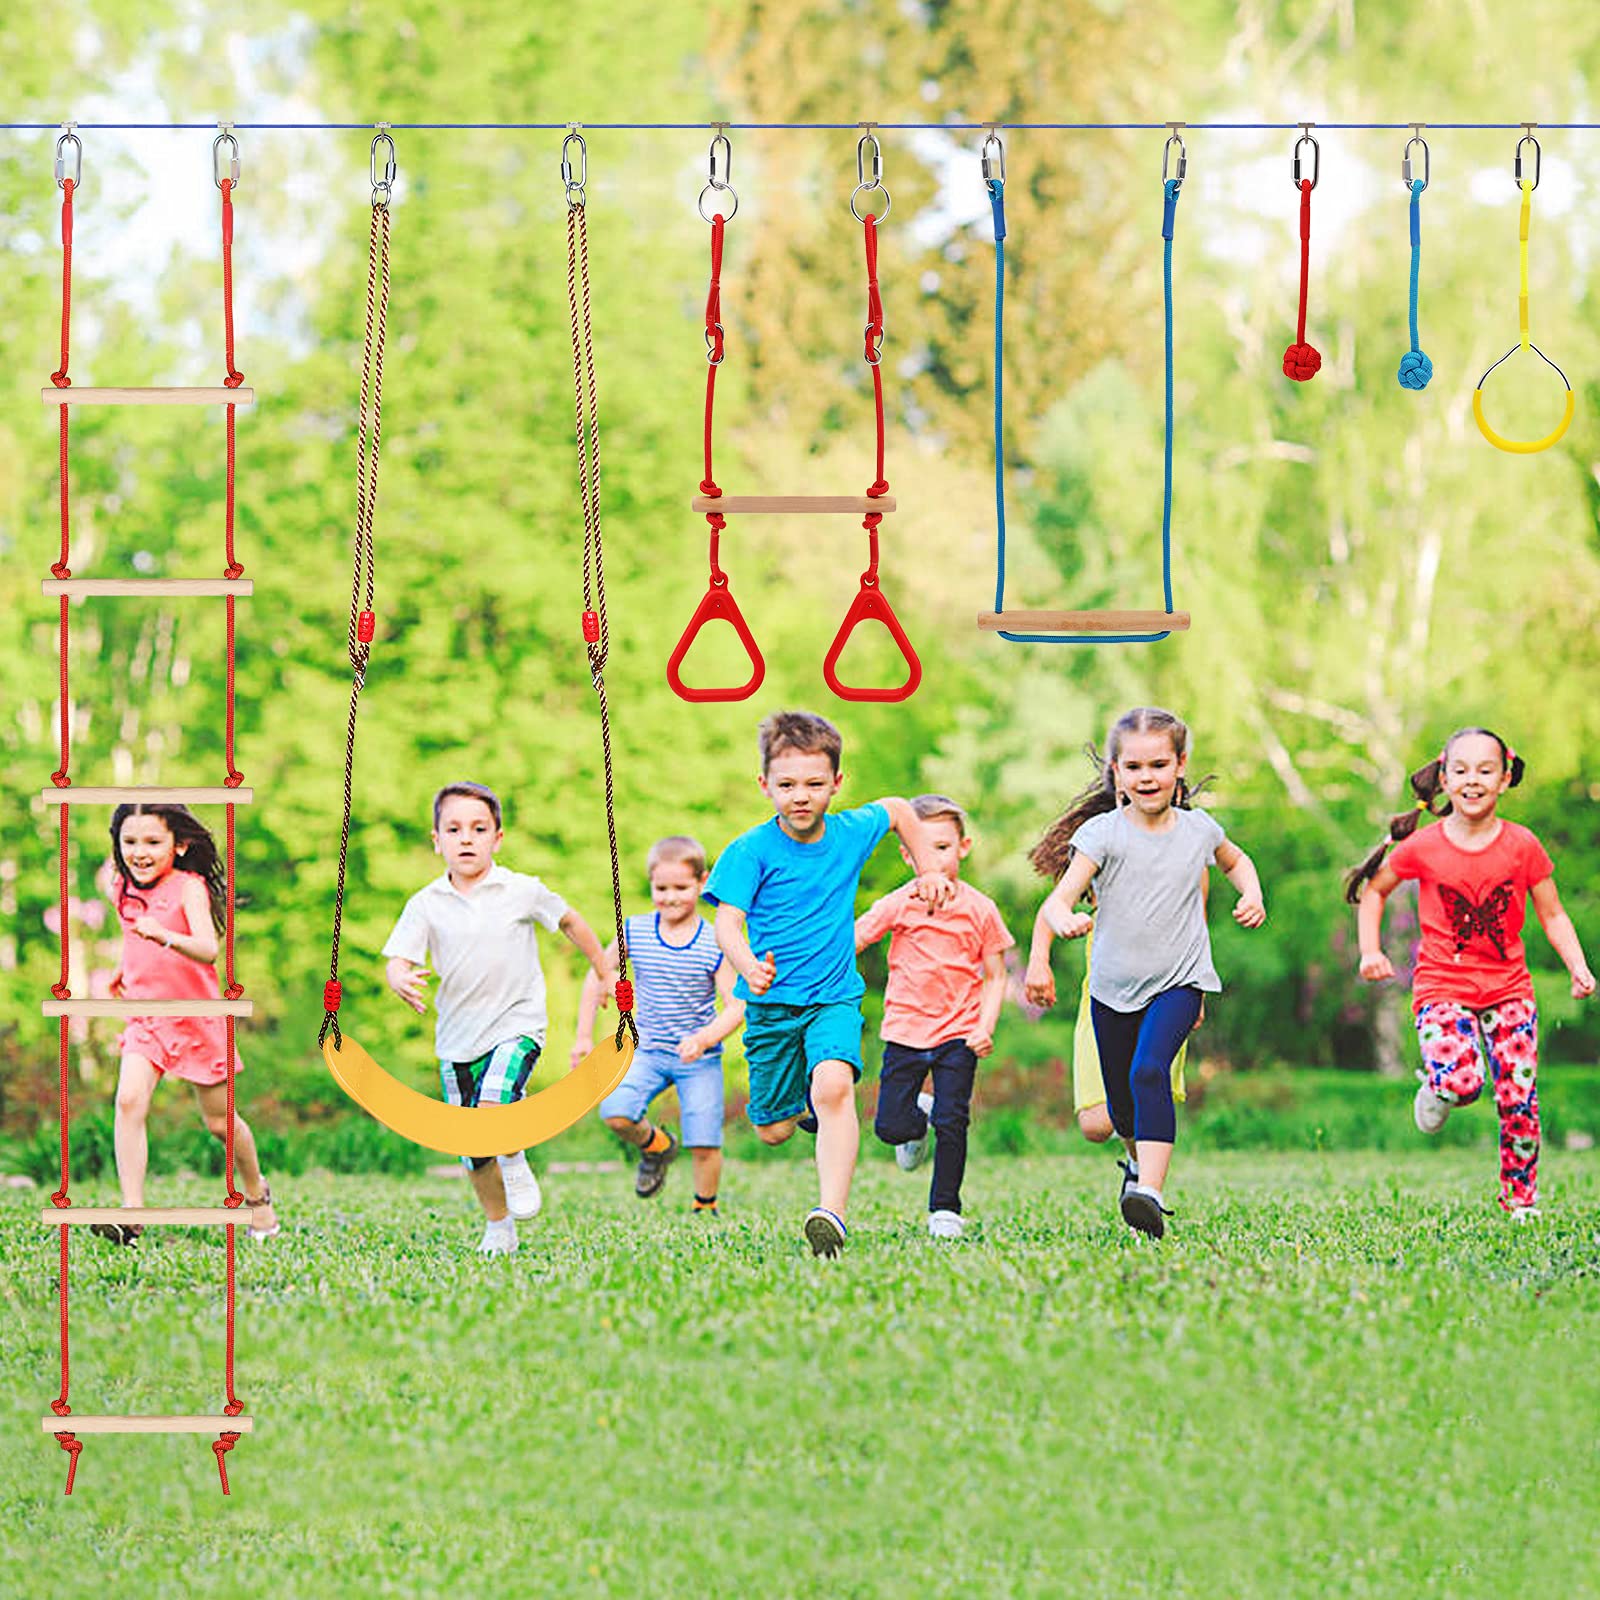 Ninja Warrior Kids Obstacle Course, 65 FT Durable Slackline with 7 Obstacles-Swings, Monkey Bars, Arm Trainers and More, Weatherproof Outdoor Obstacle Course for Backyard, Gym, Field，3+ Years Old